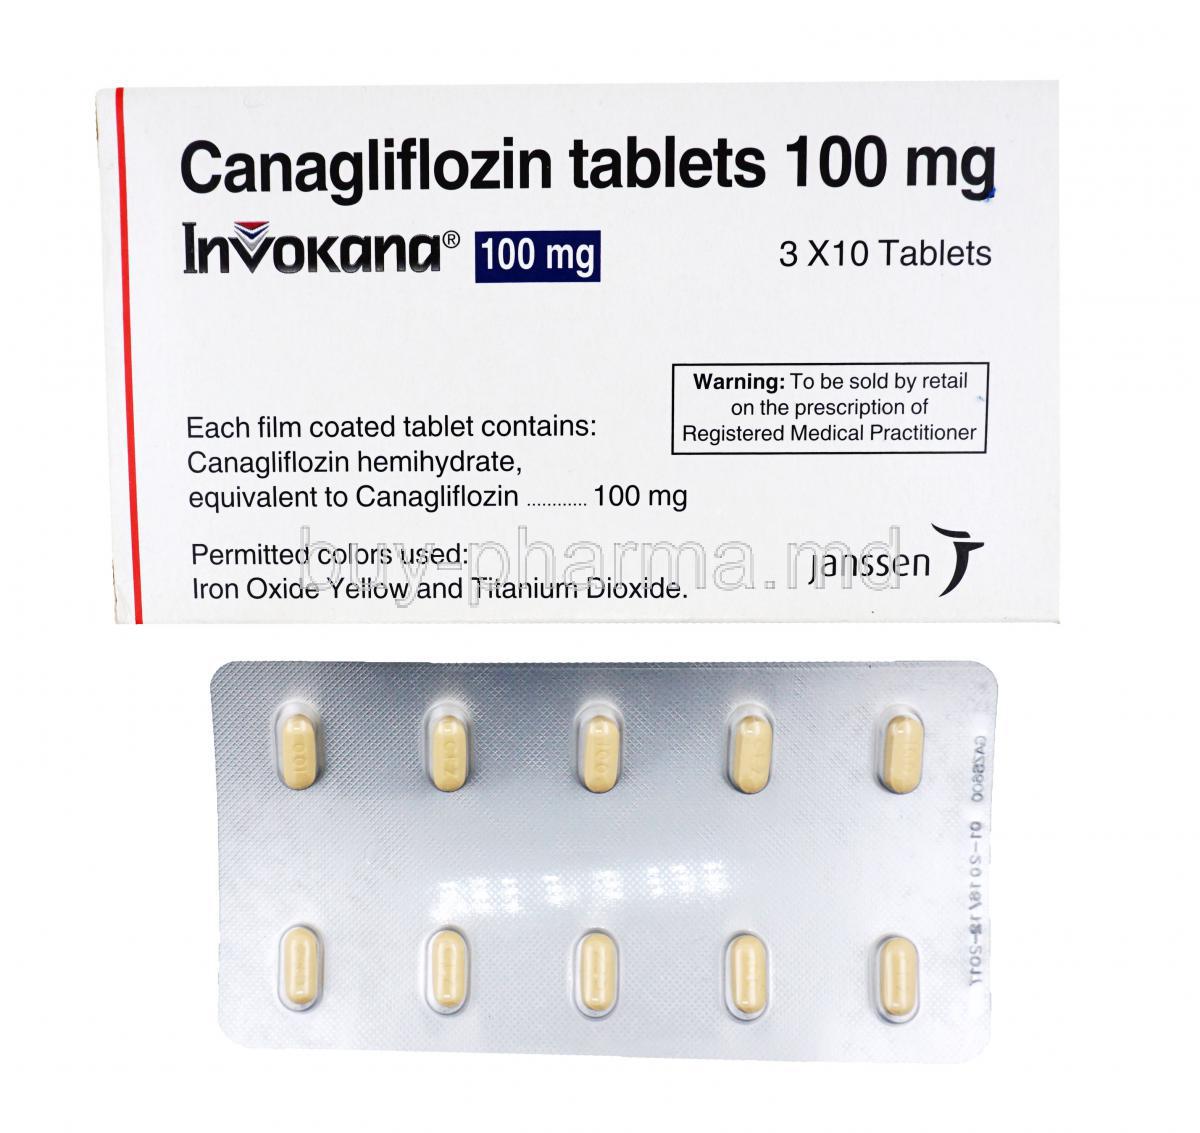 Invokana, Canagliflozin, Canagliflozin, 3x 10 tabs 100mg, Janssen, Box and blister pack front presentation, contents of tablets, warning label.